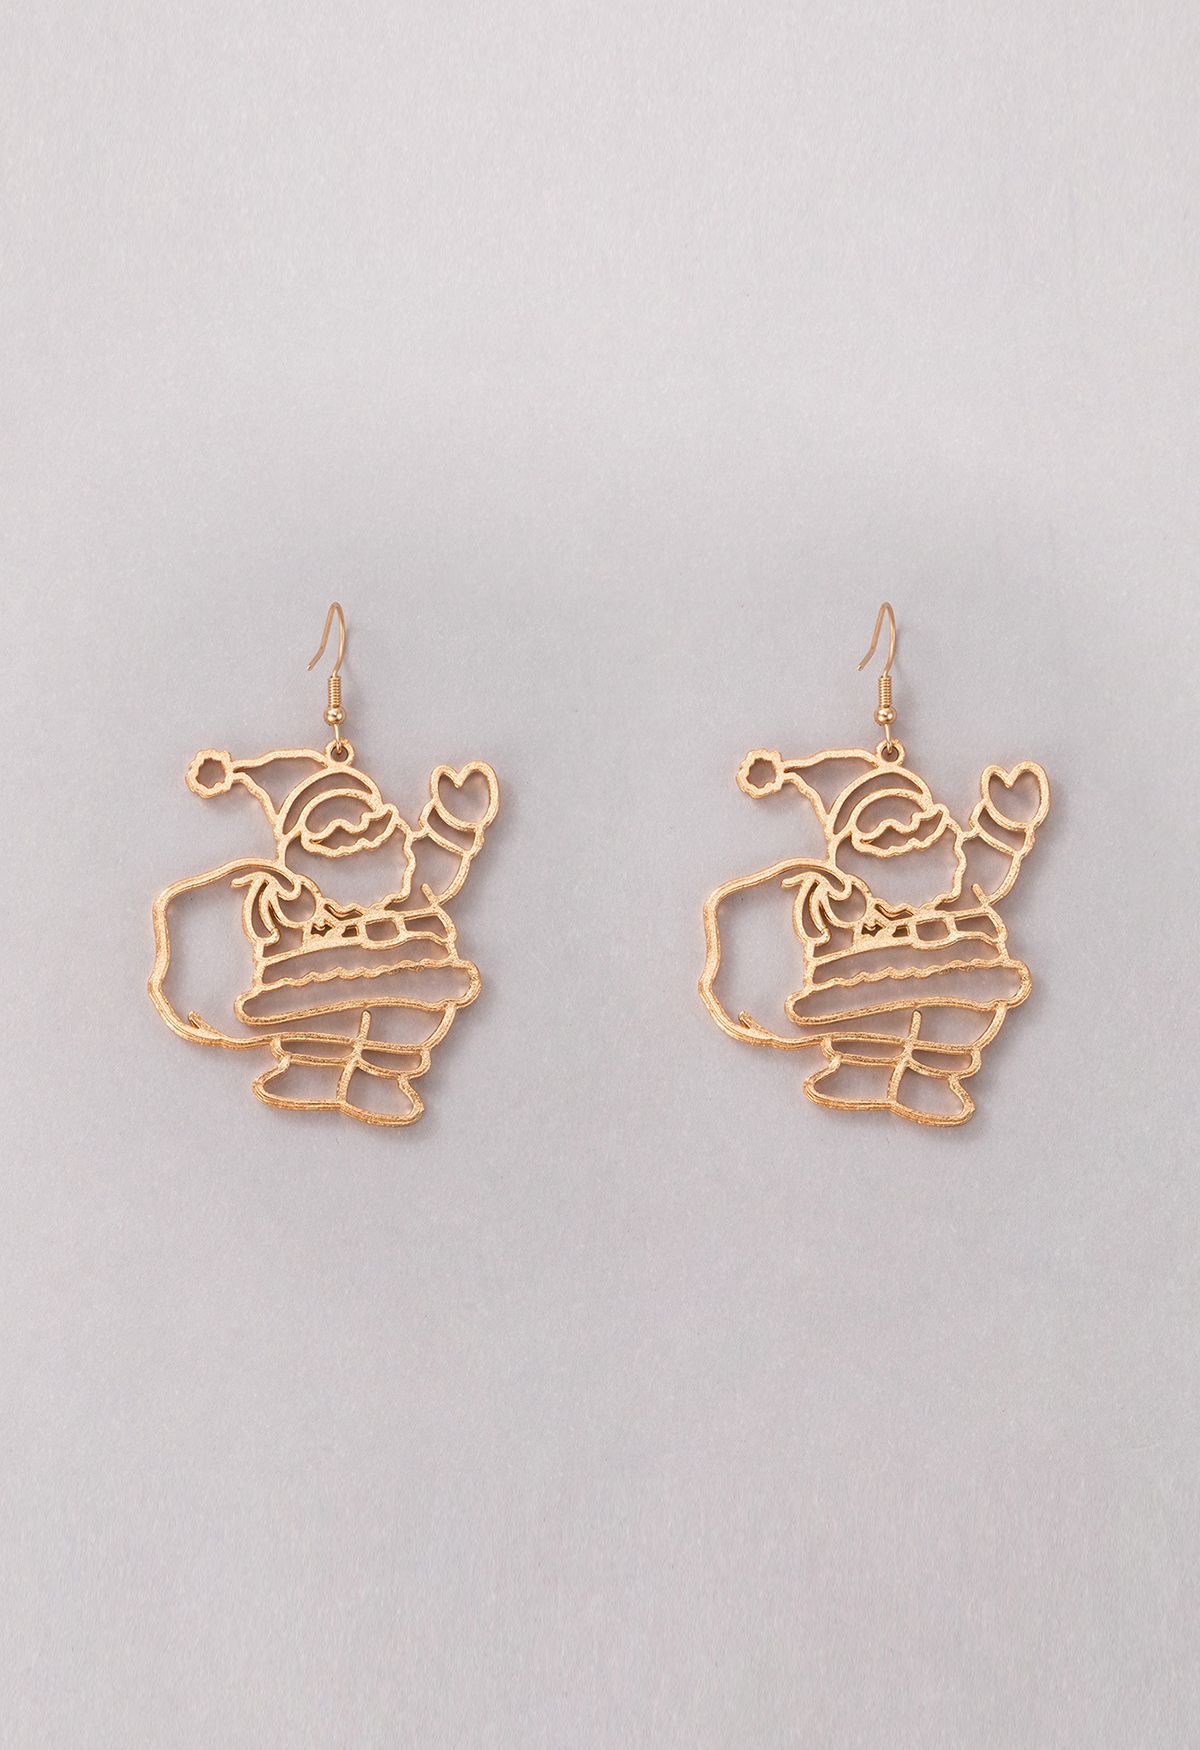 Hollow Out Santa Claus Earrings